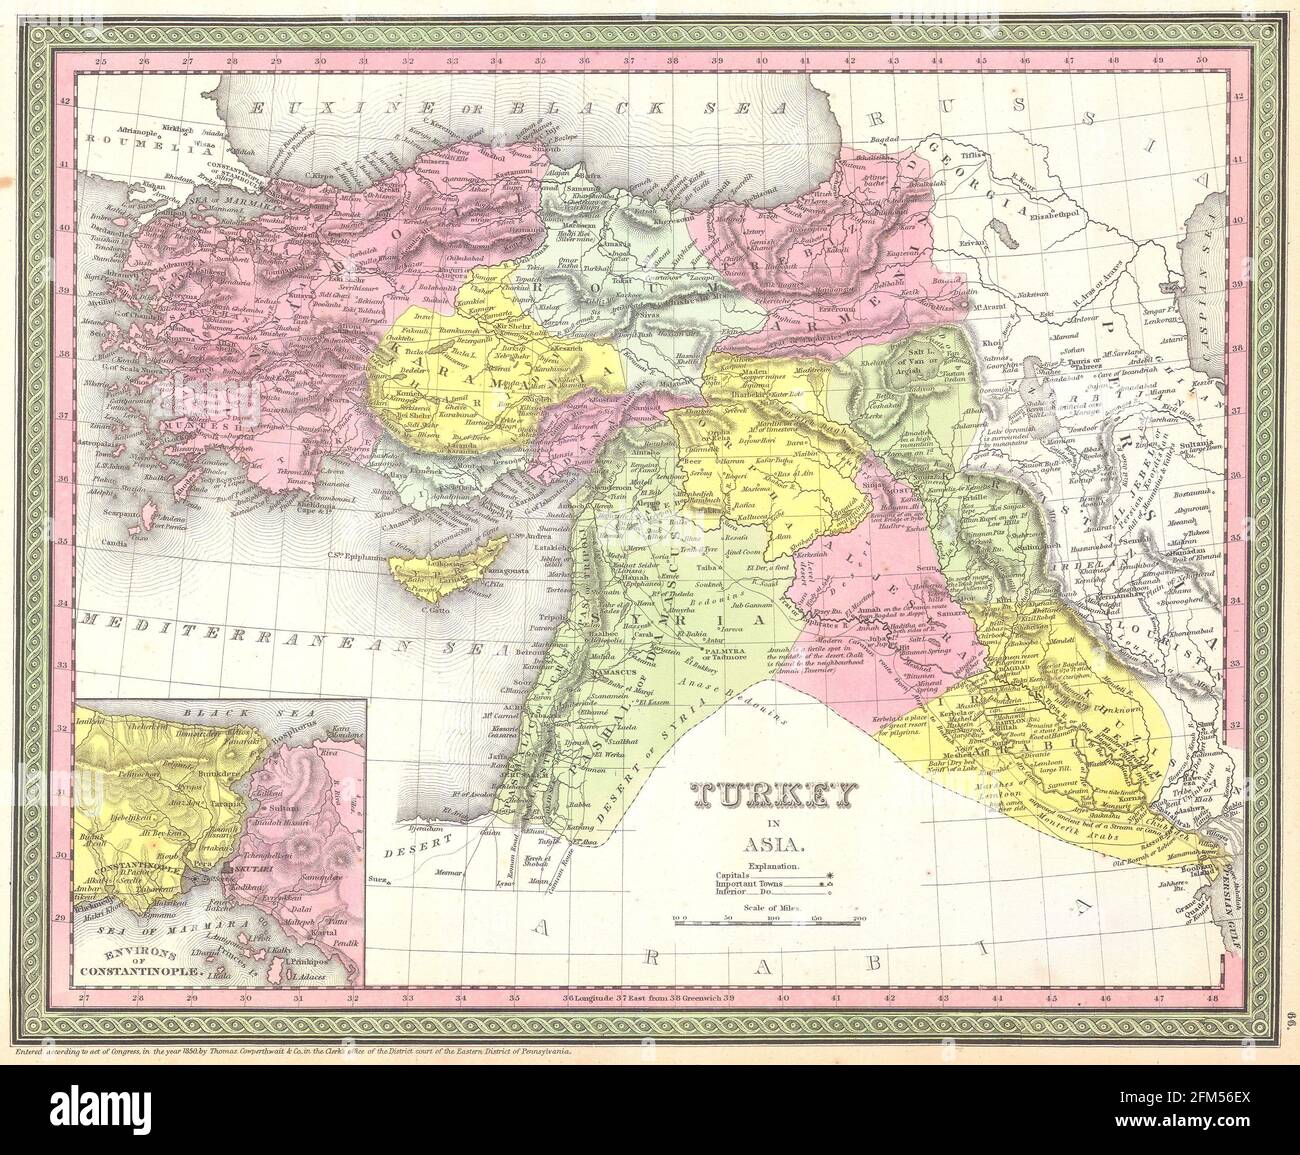 Vintage copper engraved map of Turkey from 19th century. All maps are beautifully colored and illustrated showing the world at the time. Stock Photo